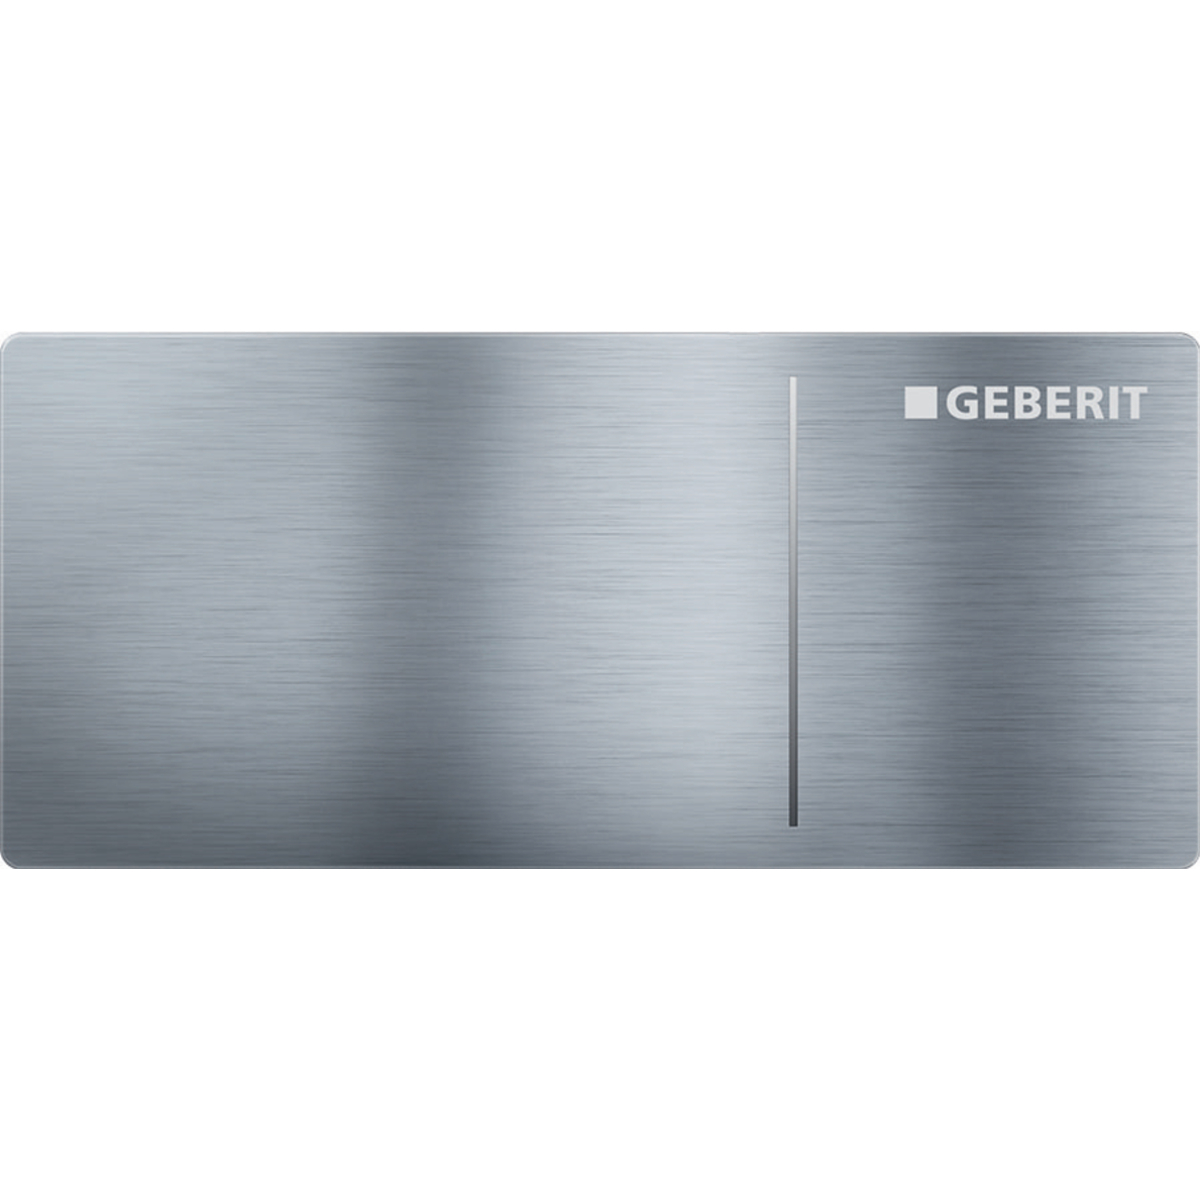 Geberit 115.084.FW.1 Remote Flush Actuation Type 70 for Dual Flush, for Omega Concealed Cistern - Stainless Steel Brushed